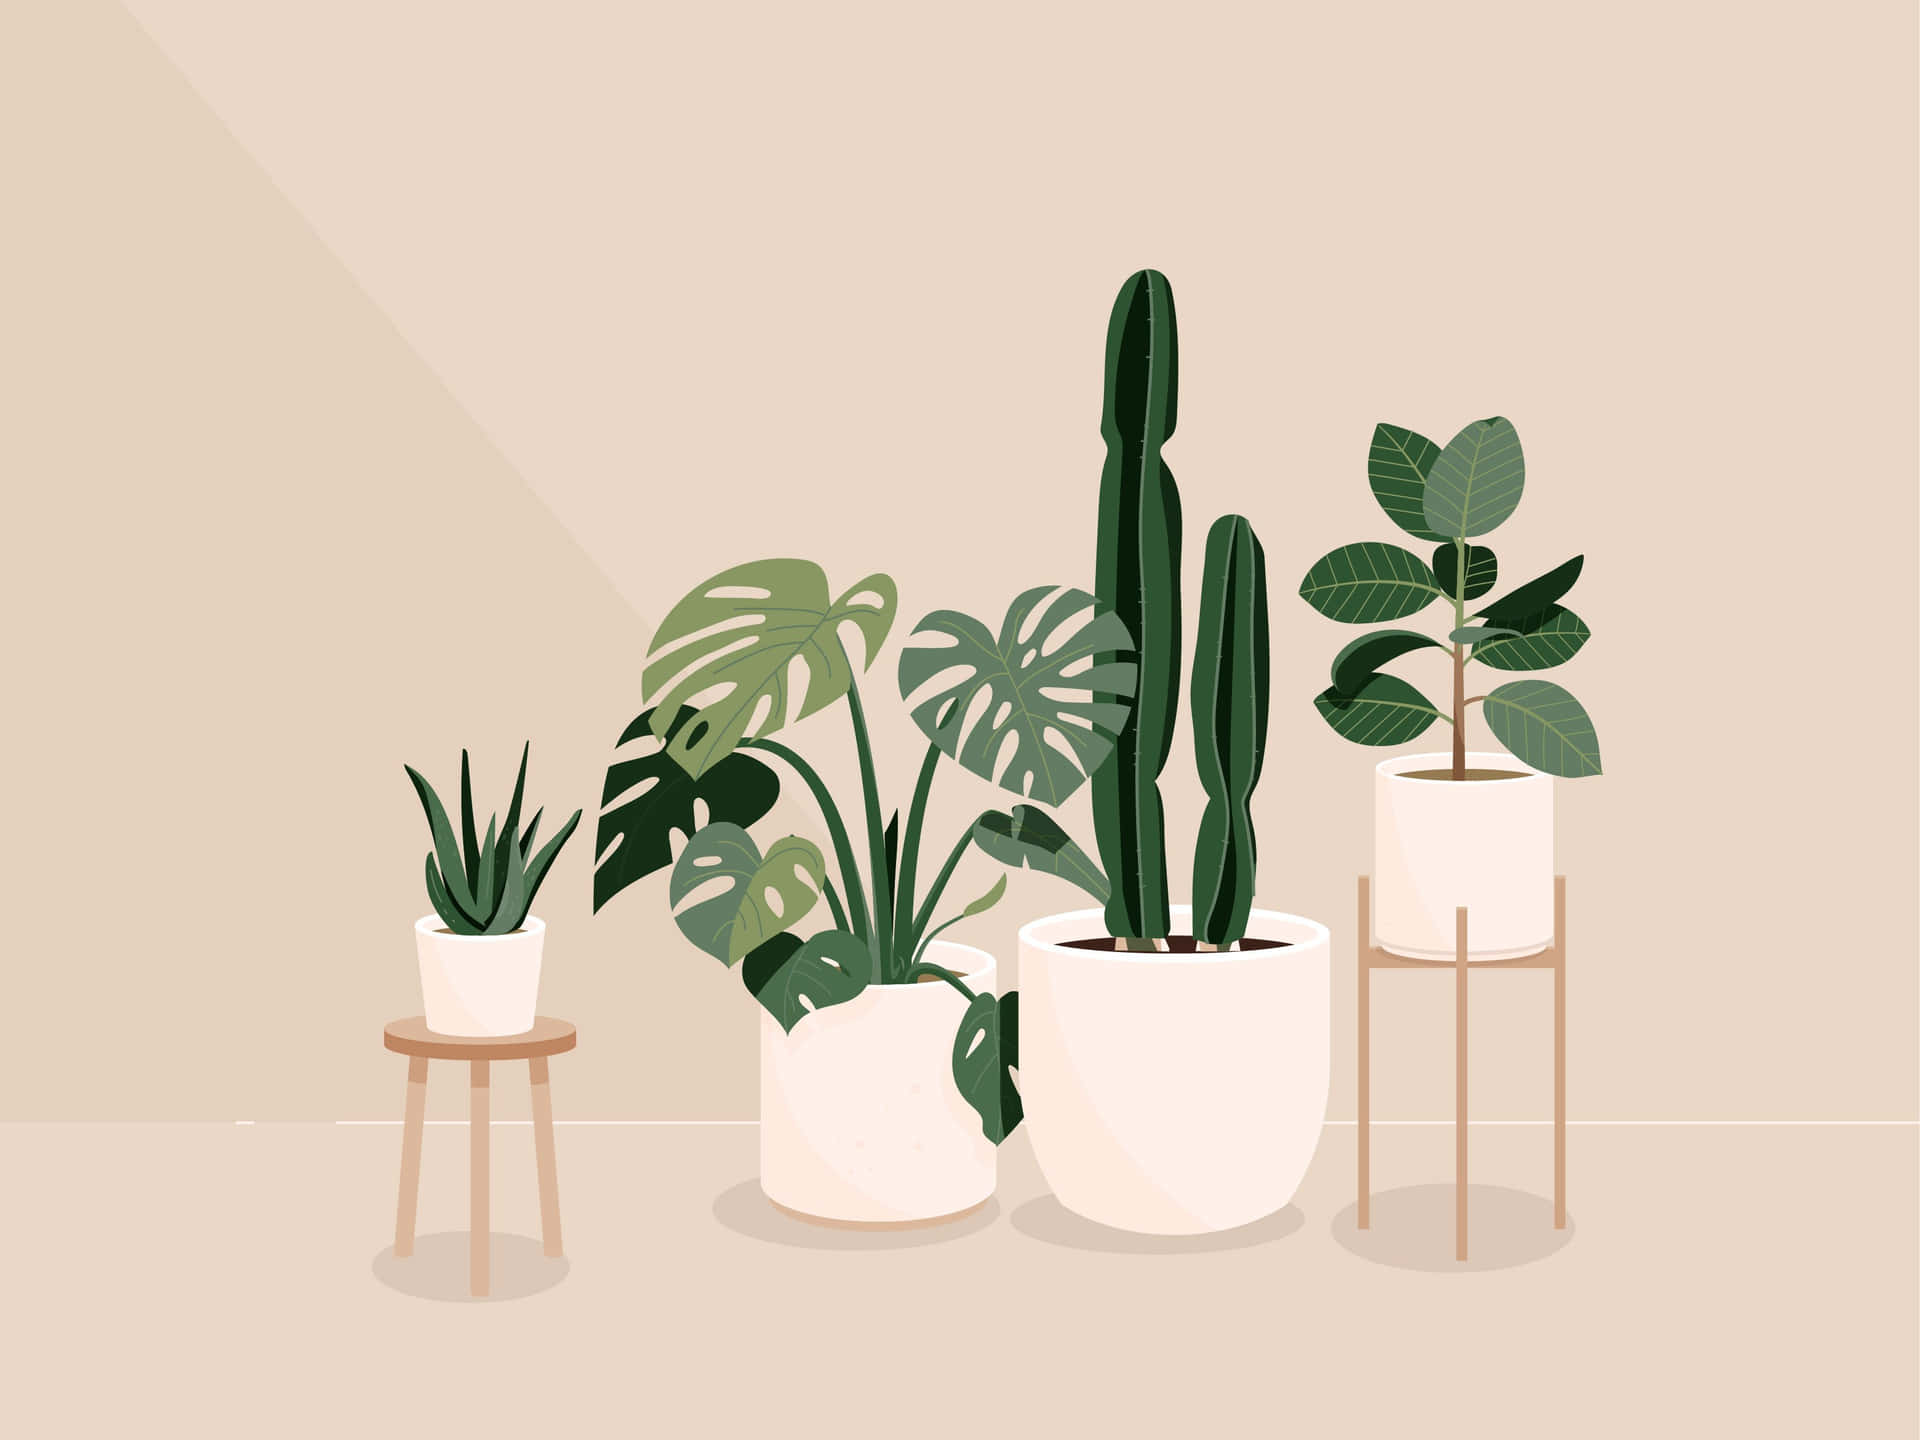 A Set Of Potted Plants In A Room